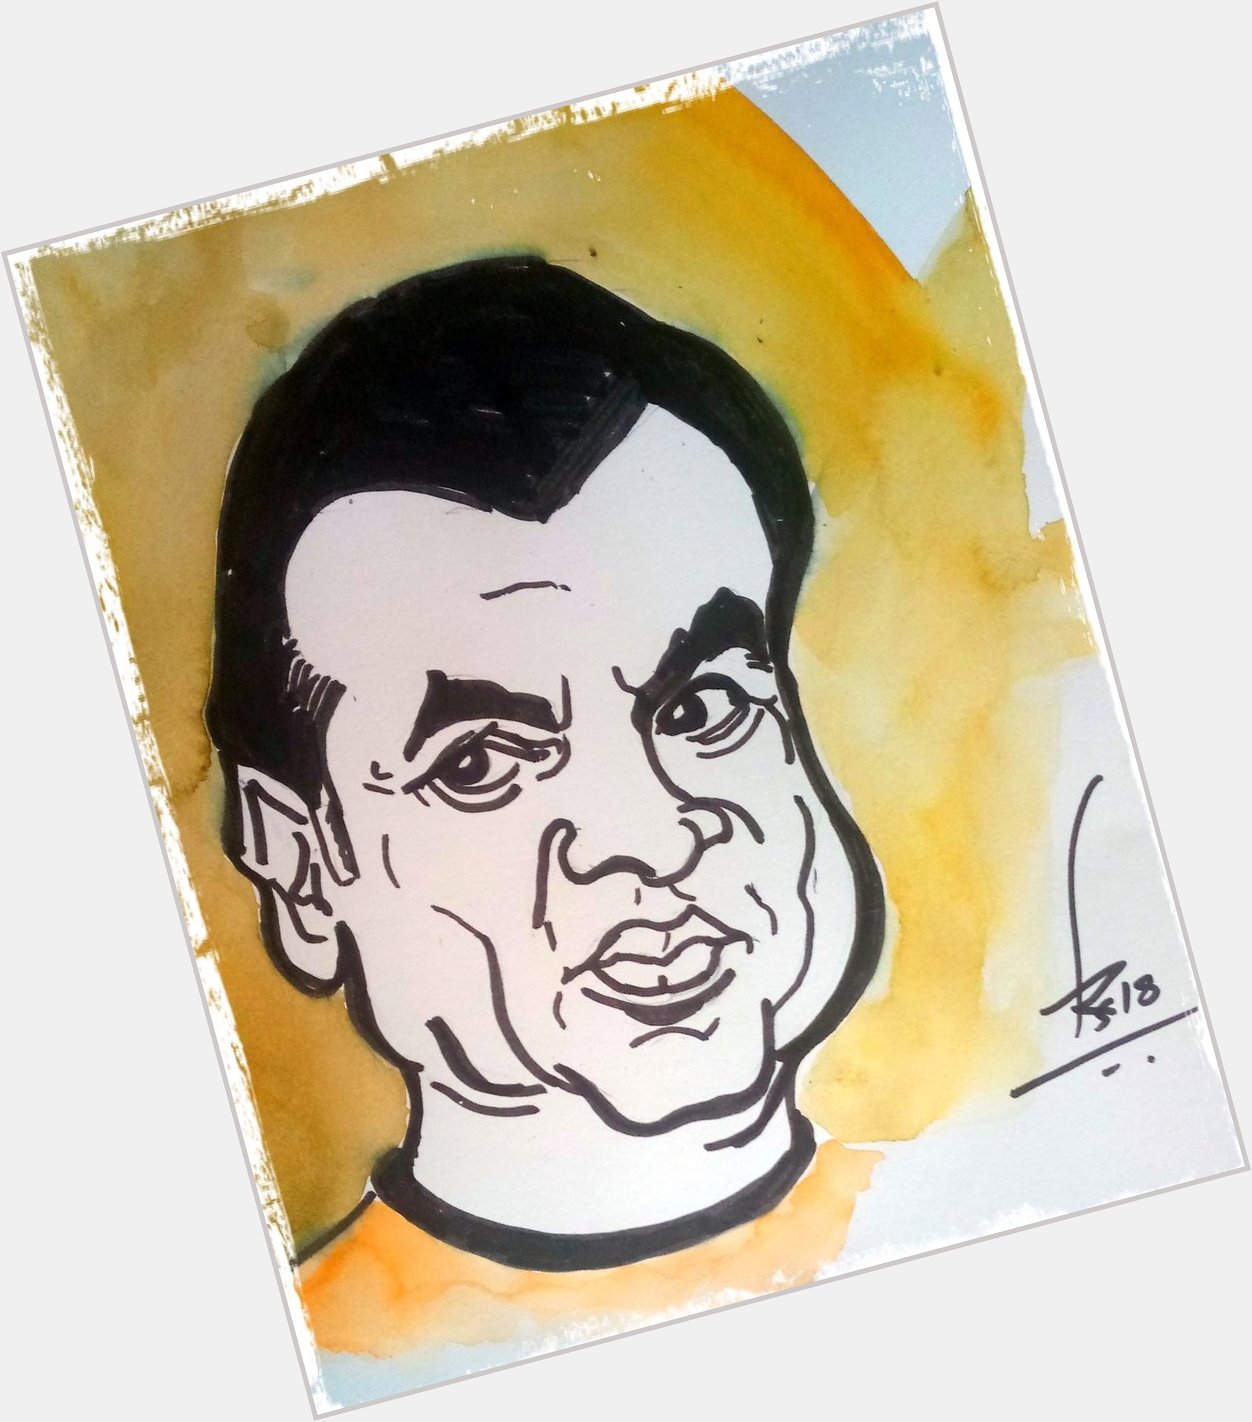 Caricature of my favourite actor
Paresh Rawal
Happy birthday Sir
Sketch pen and watercolor on A paper
20 min. 